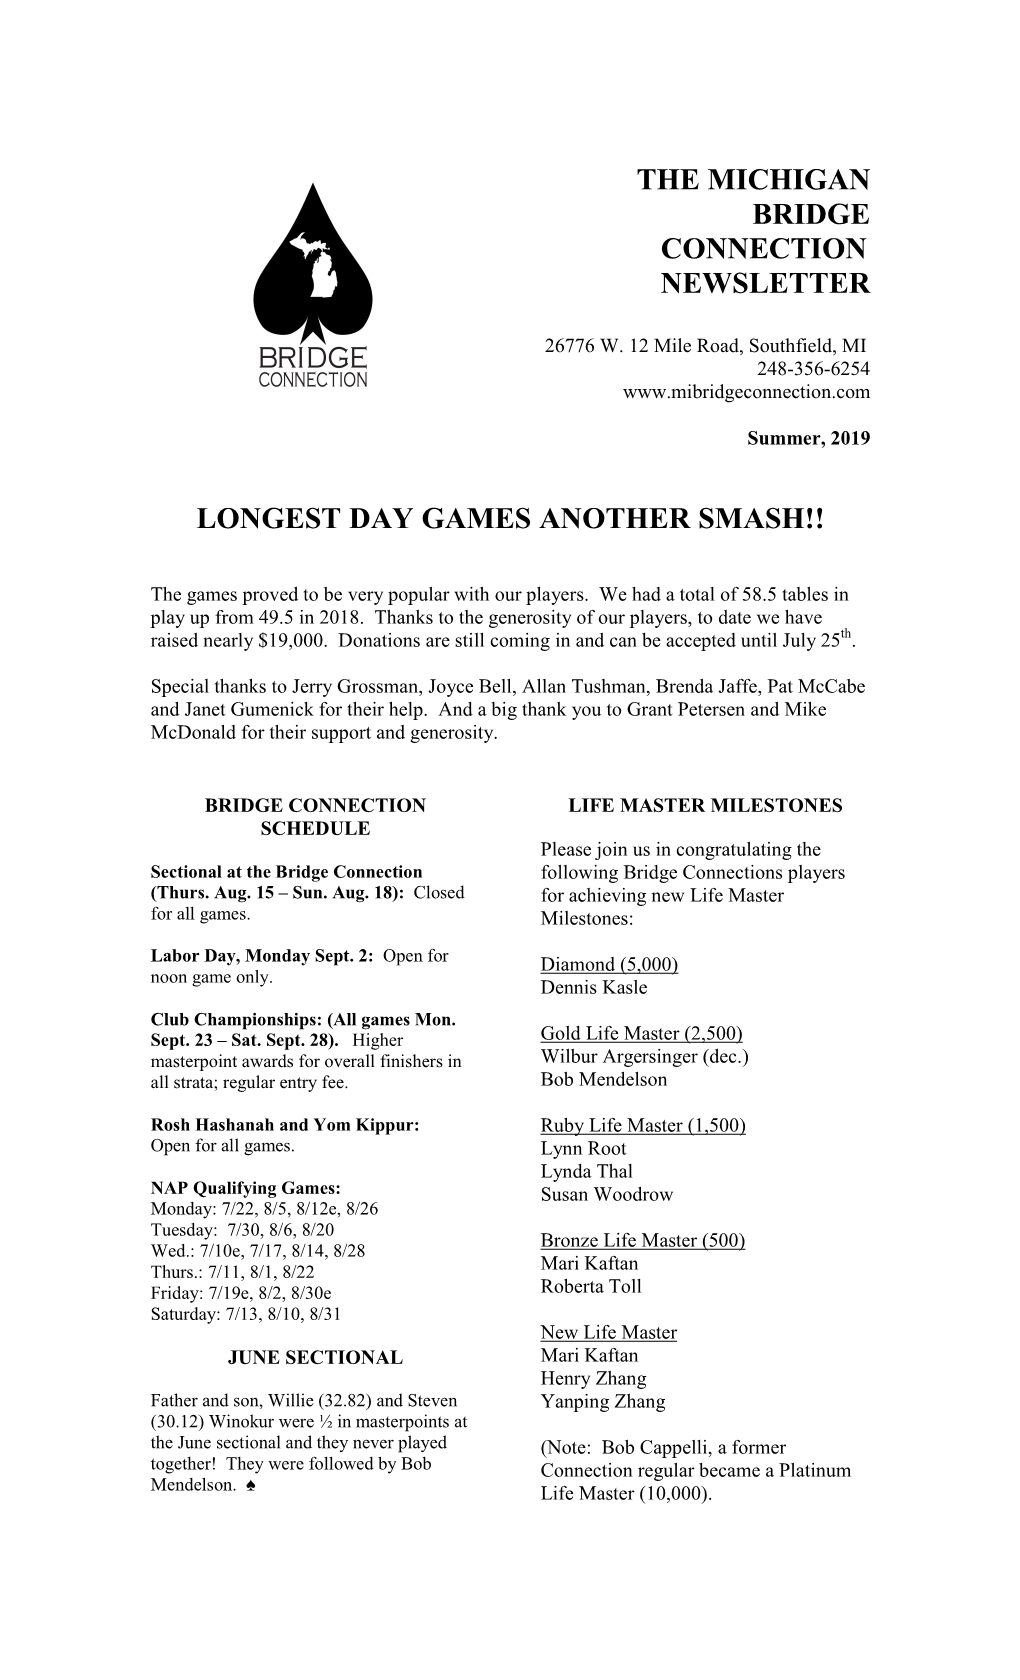 The Michigan Bridge Connection Newsletter Longest Day Games Another Smash!!